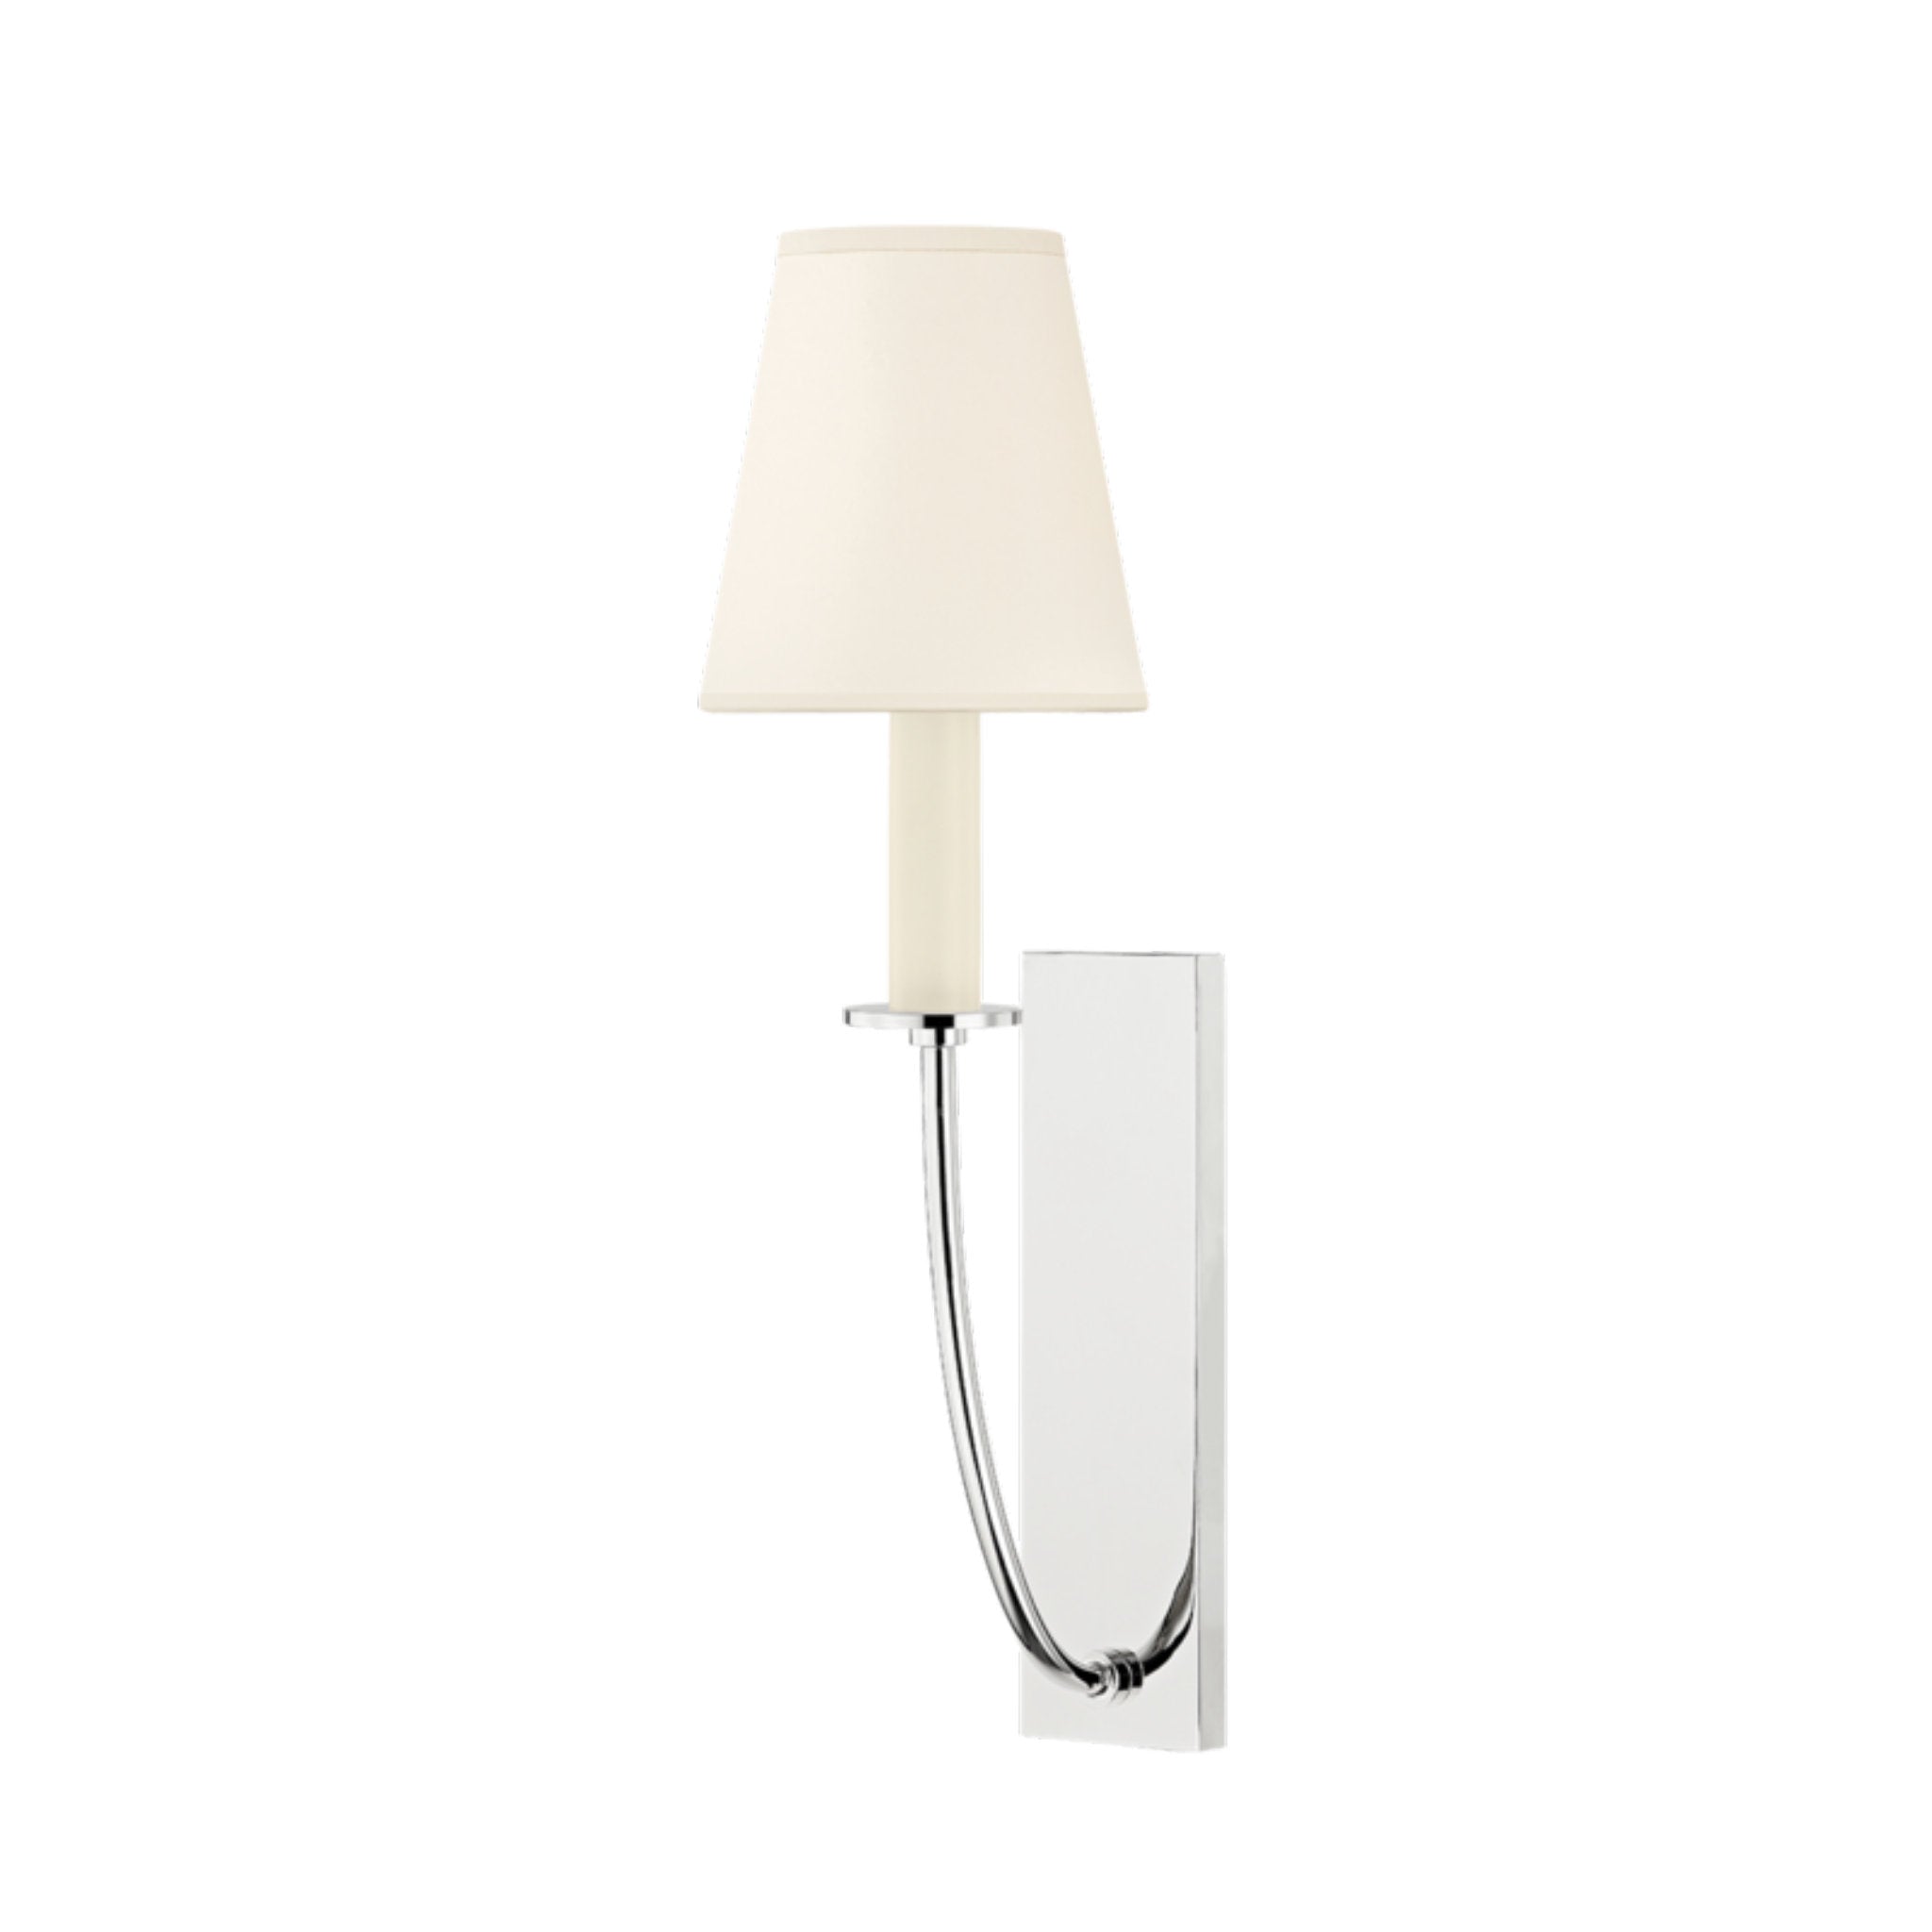 Iantha 1 Light Wall Sconce in Polished Nickel